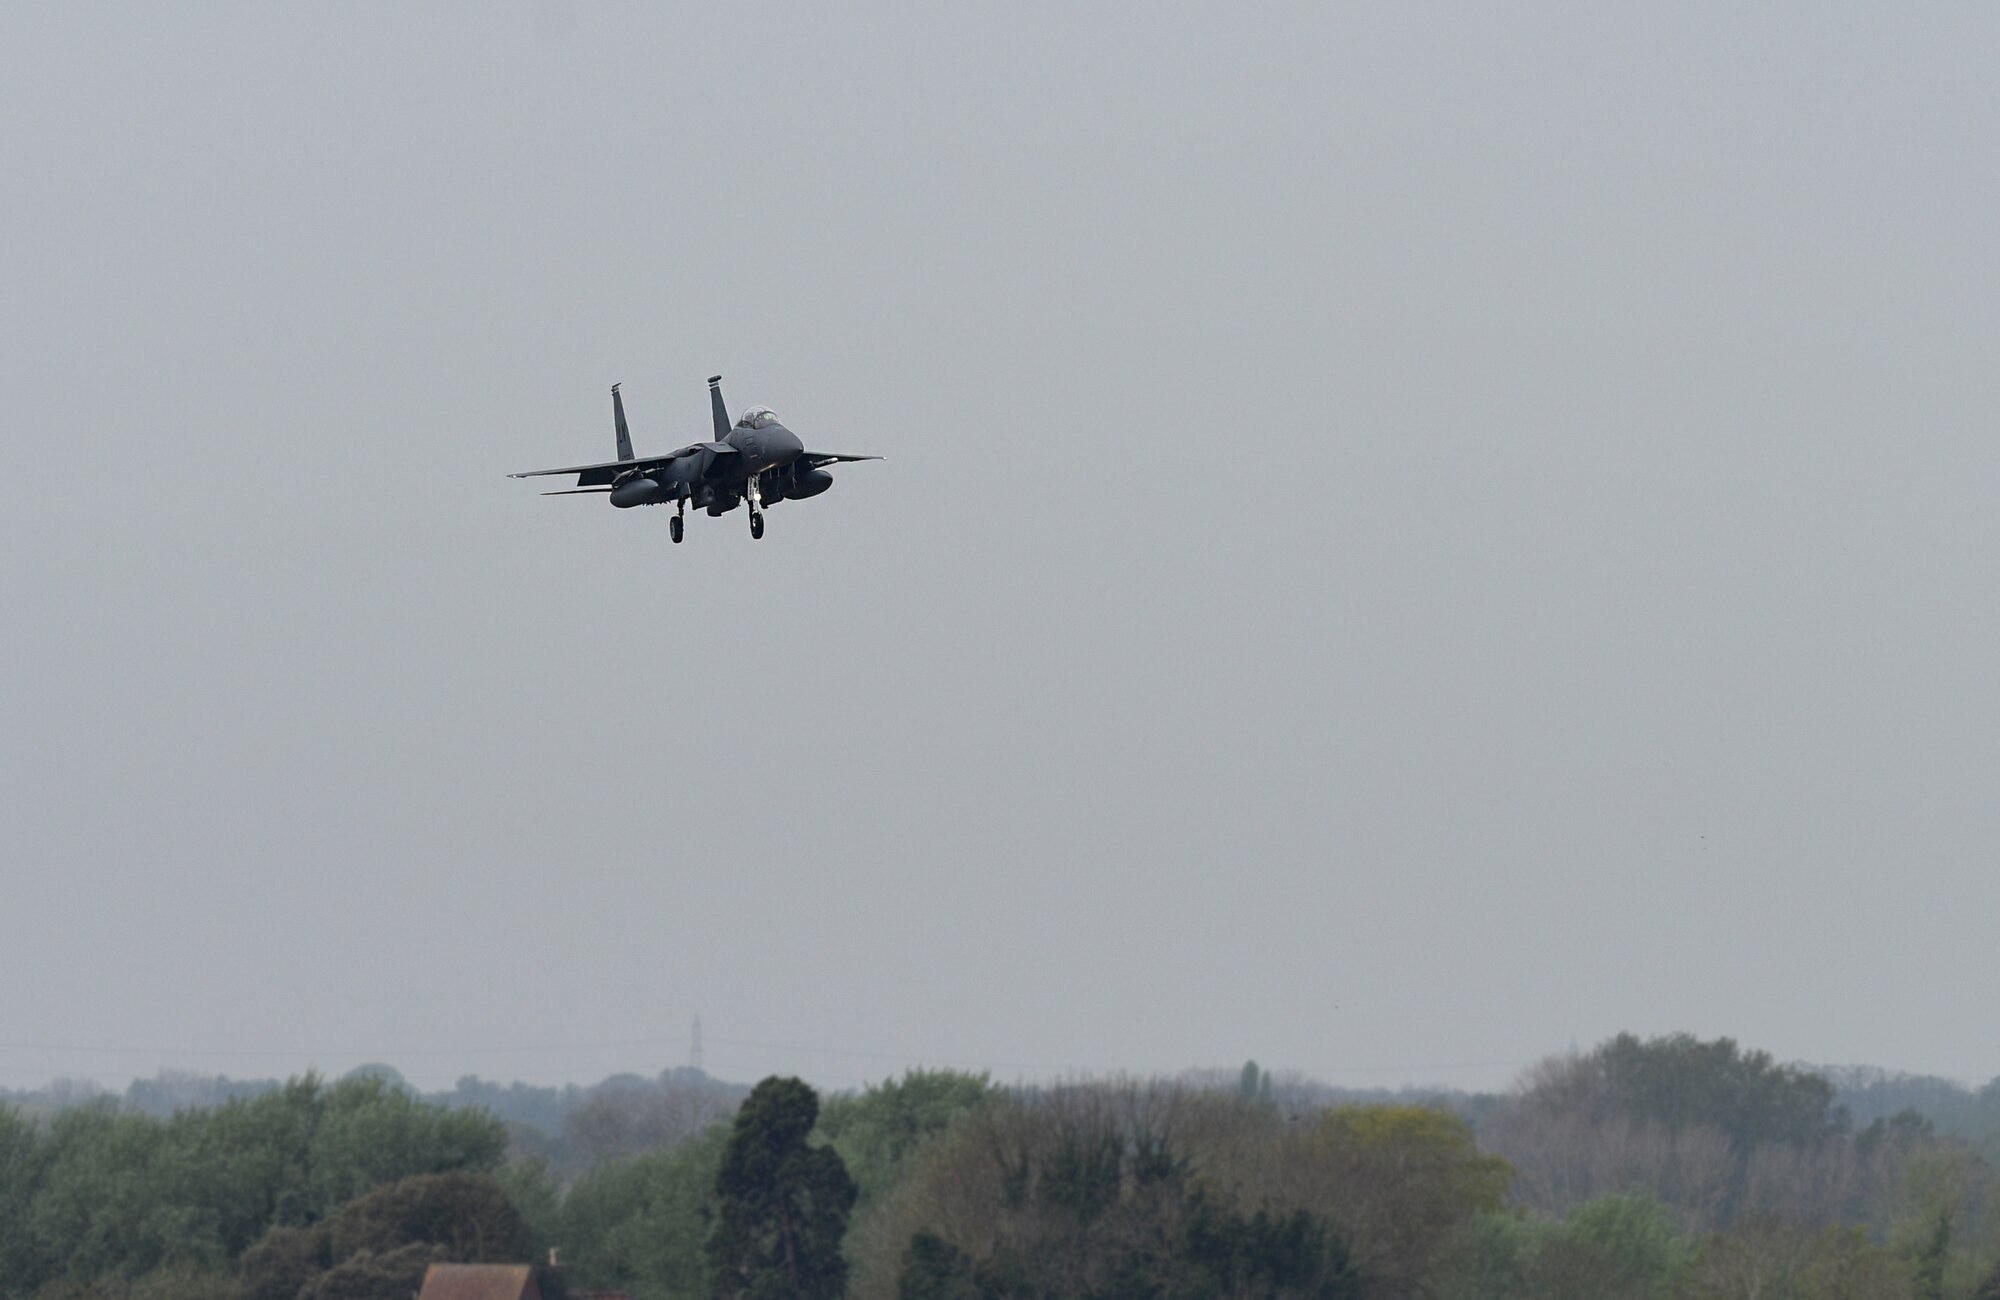 An F-15E Strike Eagle assigned to the 492nd Fighter Squadron approaches to land on the flight line at Royal Air Force Lakenheath, England, April 23, 2019. The 48th Fighter Wing is participating in a readiness exercise from 23-25 April focused on continuous operations over a 48-hour period. (U.S. Air Force photo by Airman 1st Class Madeline Herzog)